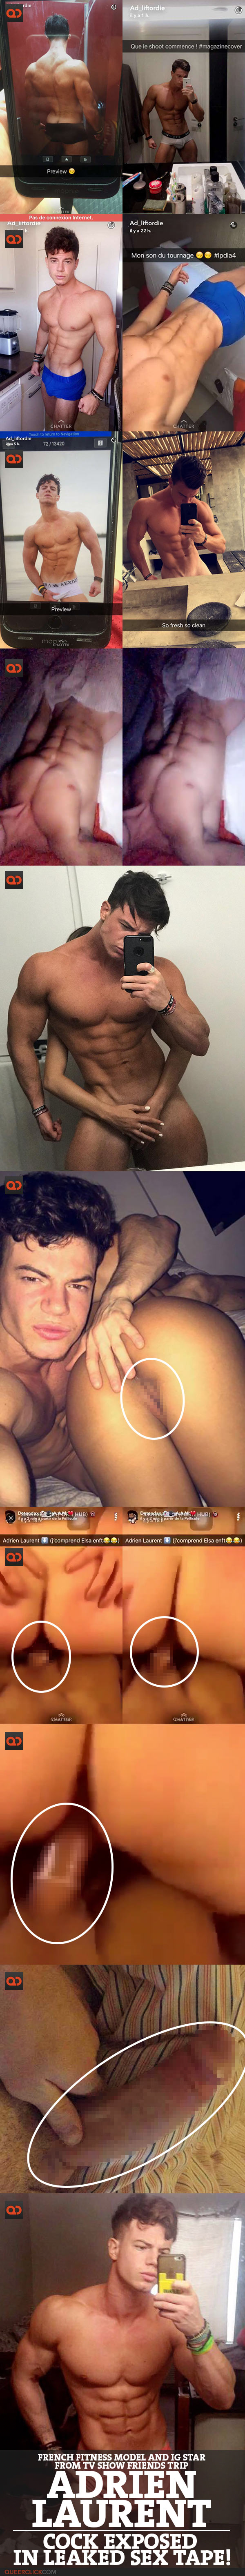 Adrien Laurent, French Fitness Model And IG Star From TV Show Friends Trip, Cock Exposed In Leaked Sex Tape!